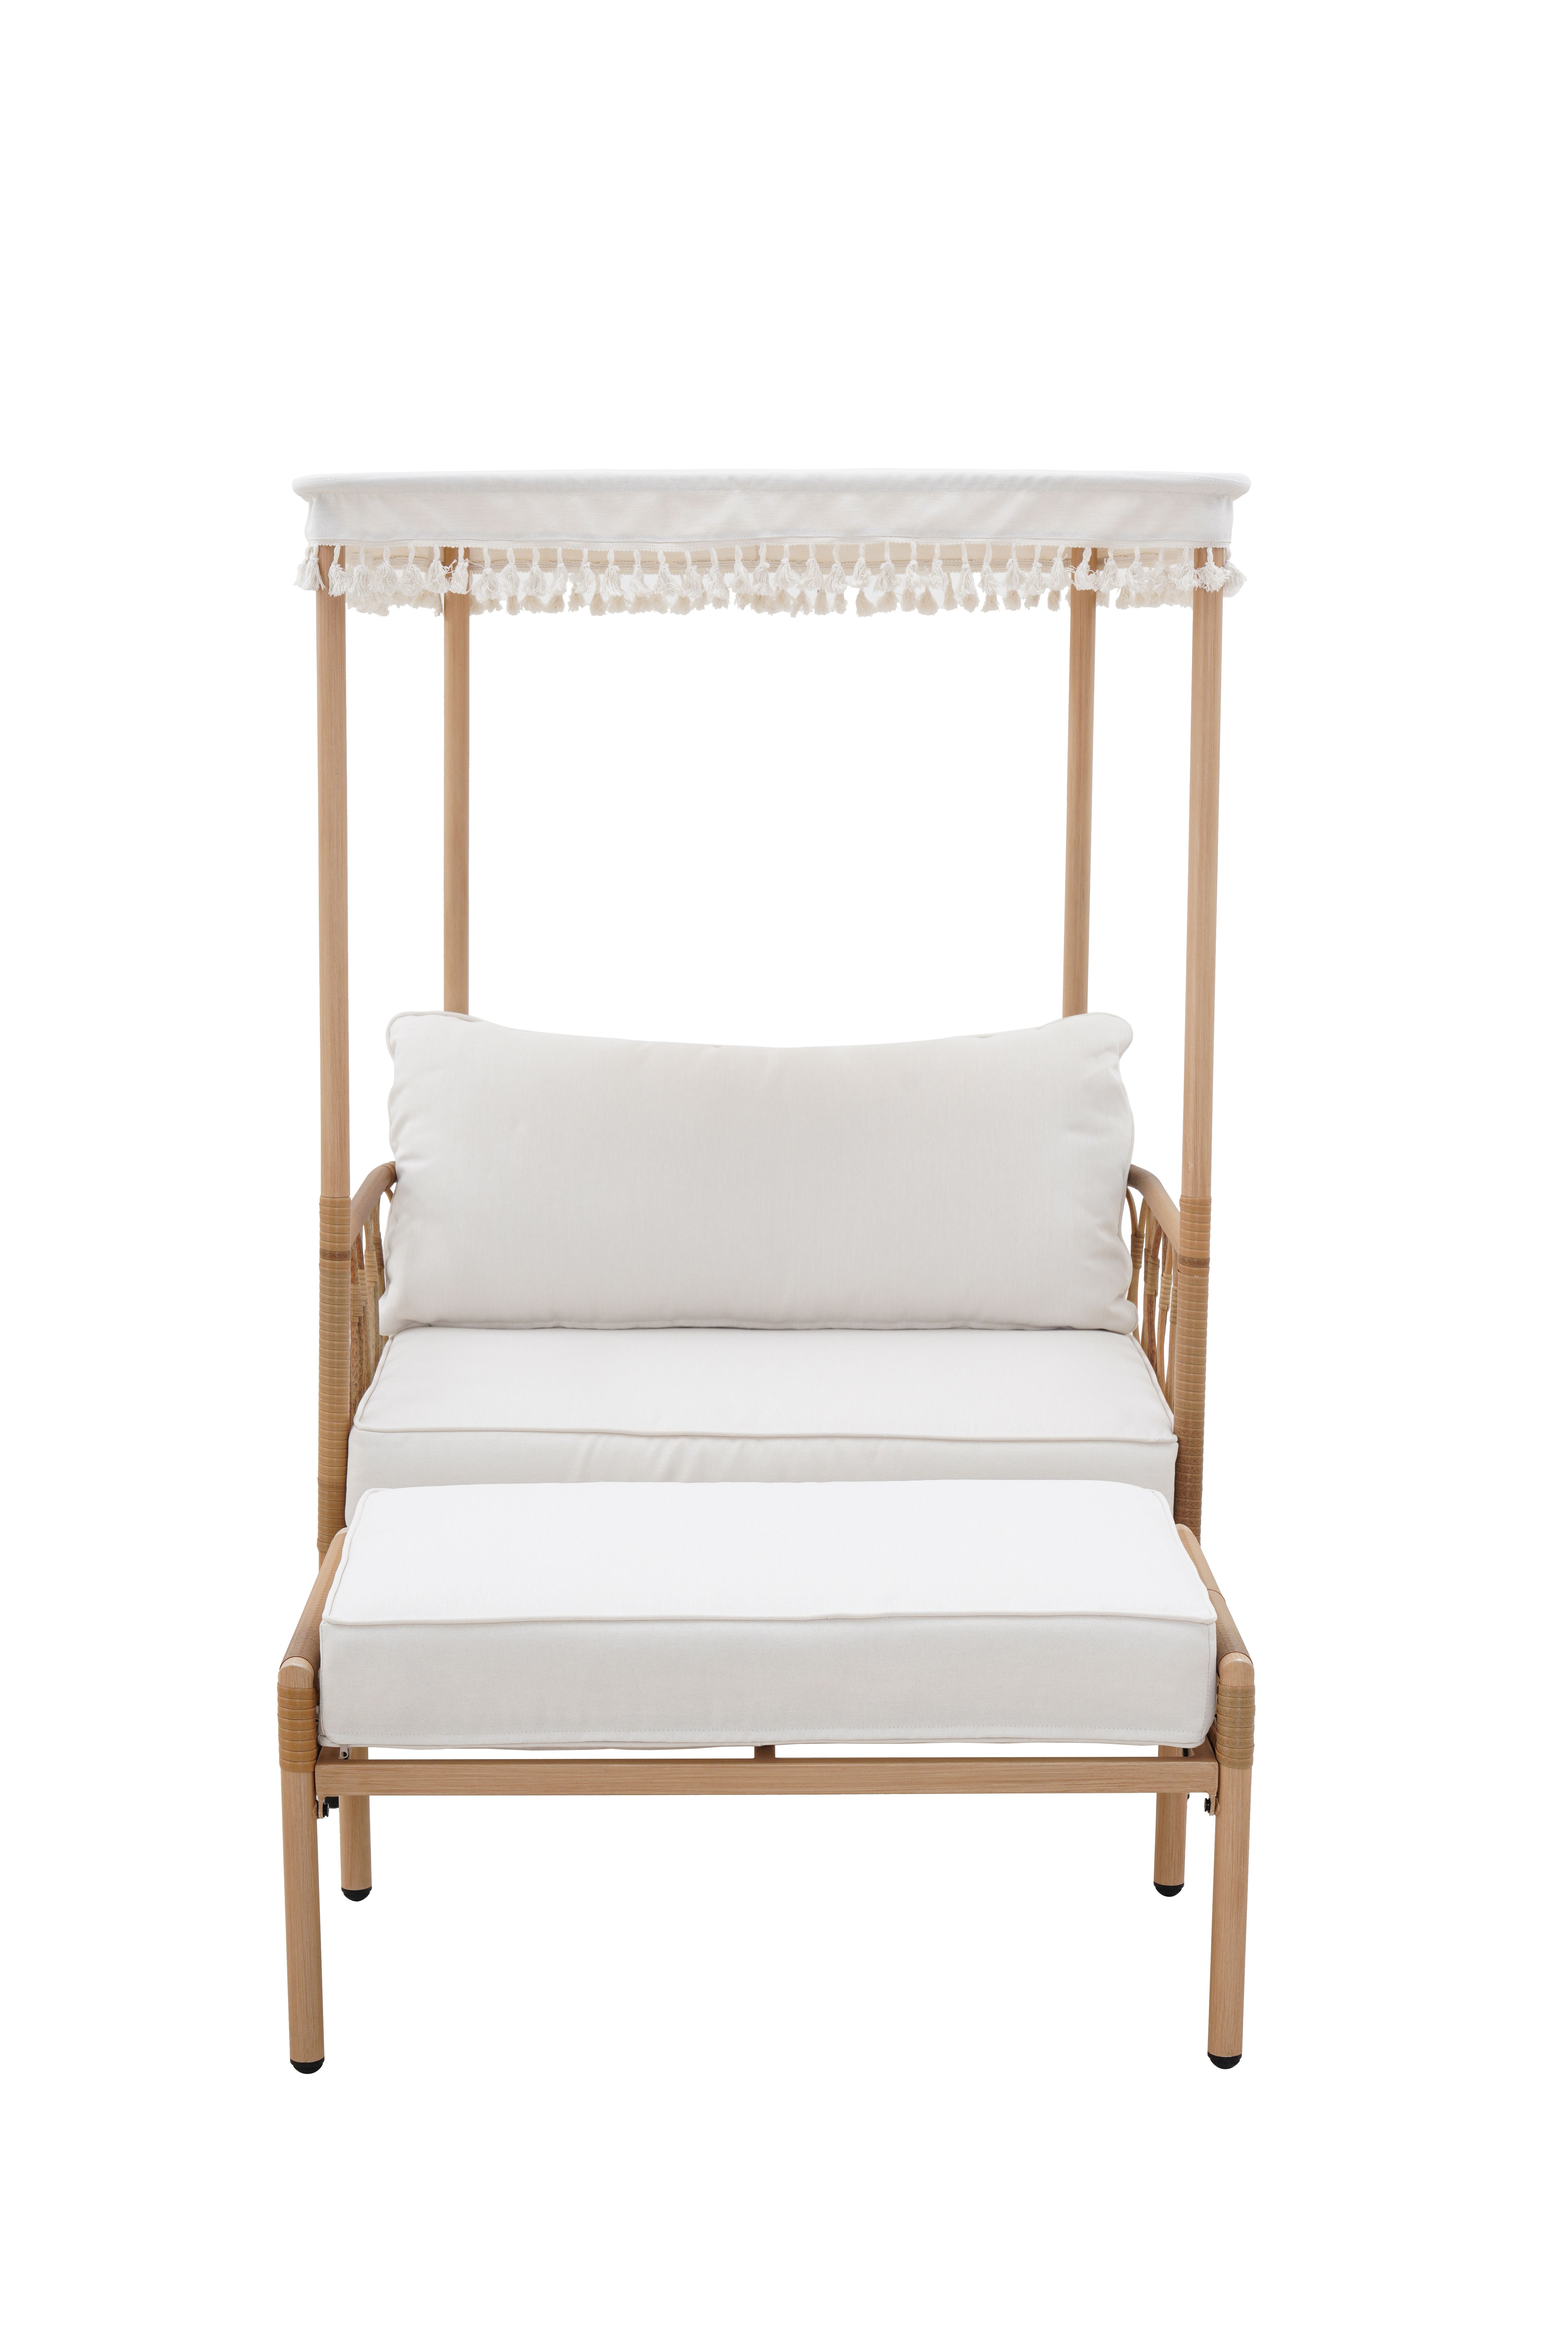 Better Homes & Gardens Willow Sage 2 Piece All-Weather Wicker Outdoor Canopy Chair and Ottoman Set, Beige - image 4 of 7